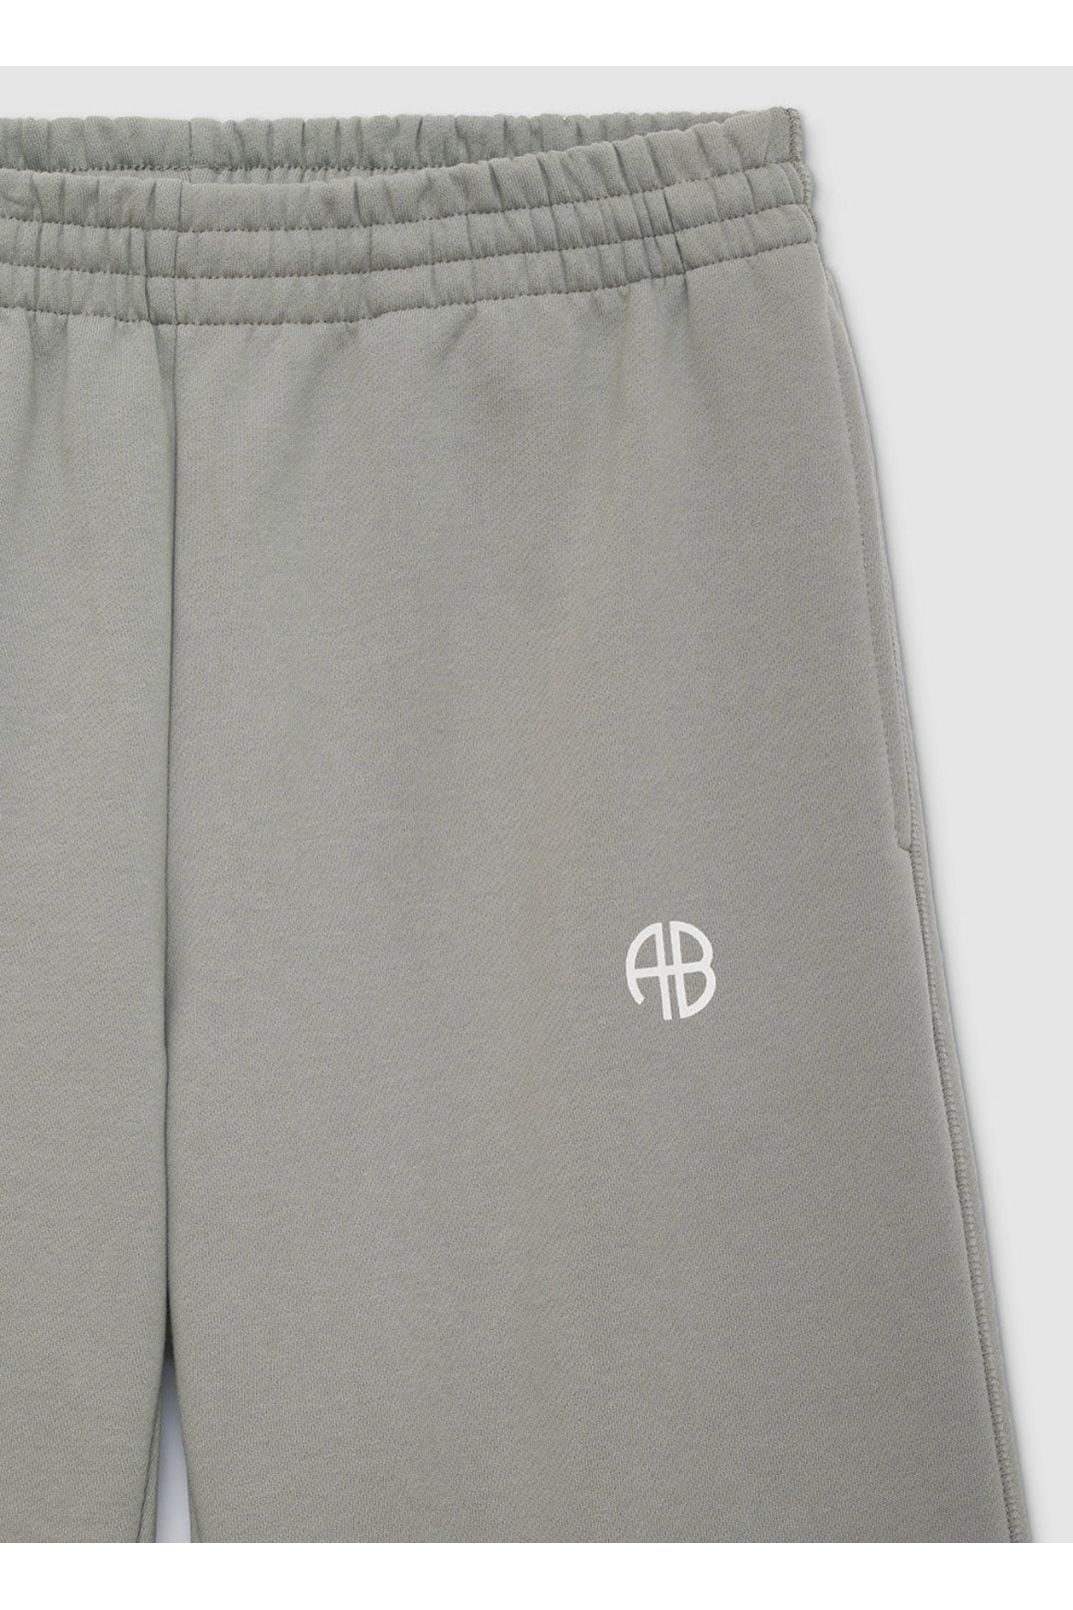 Karter Jogger in Storm Grey by Anine Bing